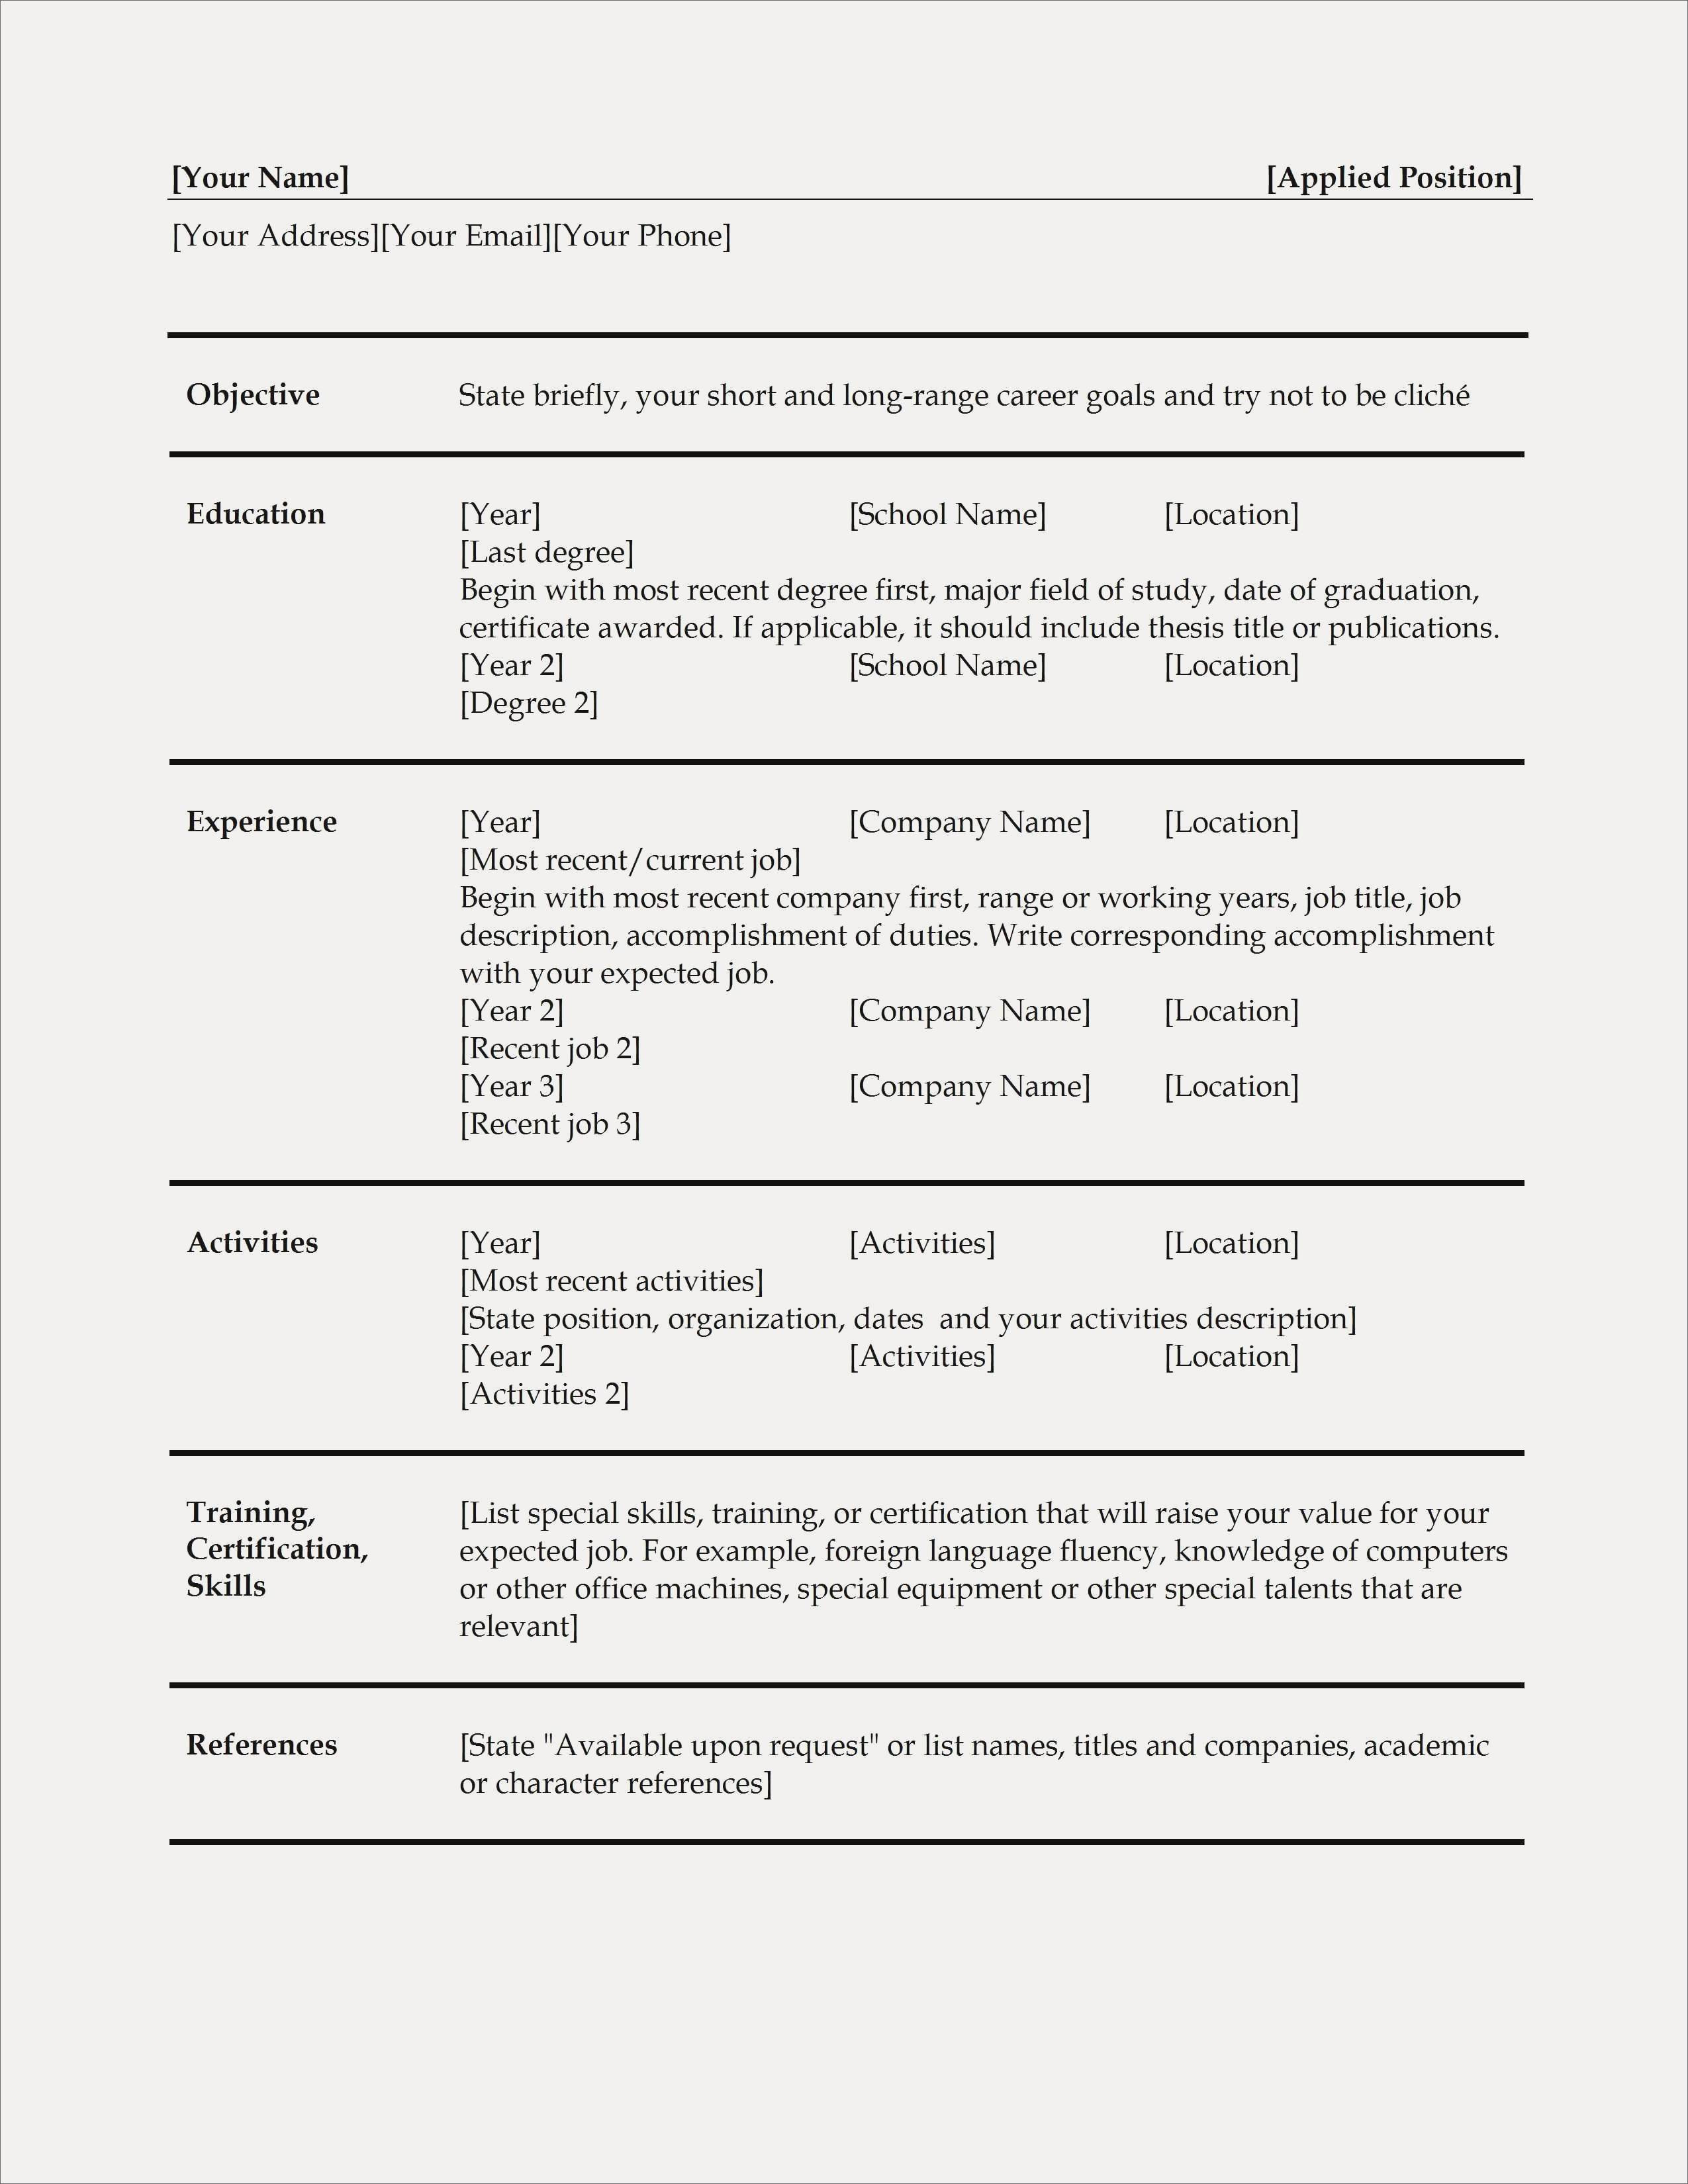 Free Downloadable Resume Templates Resume Templates Free Download Word Professional Free Download Resume Templates Best Simple Resume Template Free Of Resume Templates Free Download Word free downloadable resume templates|wikiresume.com